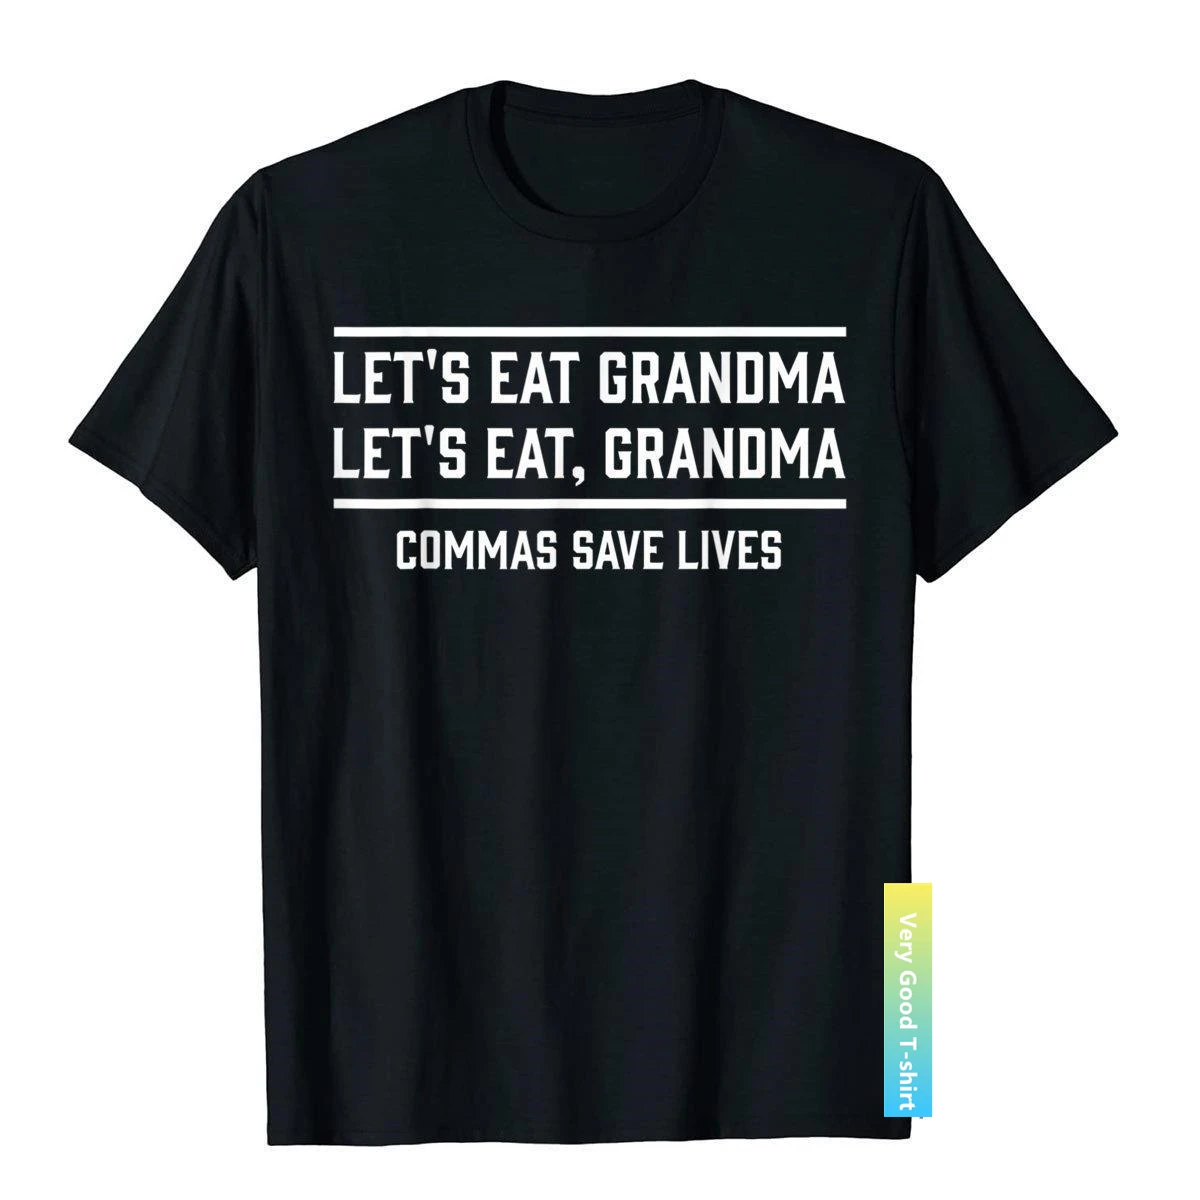 

Let's Eat Grandma Commas Save Lives Funny T Shirt Fitted Youthful T Shirts Cotton Men Tops Shirts